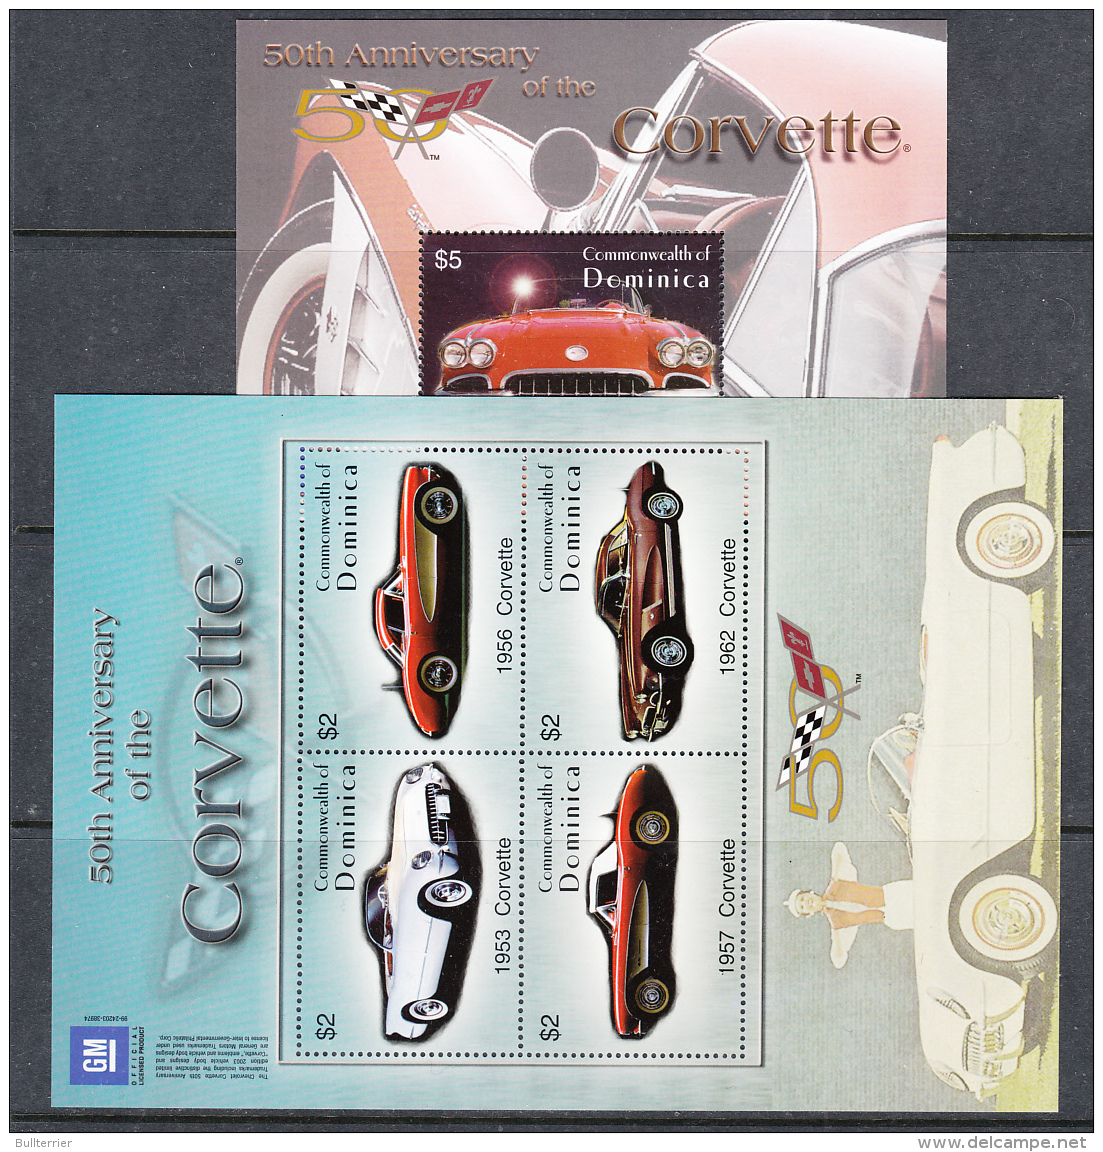 CARS - DOMINICA - 2003 - CORVETTE  50TH ANNIVERSRAY  SHEETLET OF 4 + S/SHEET MINT NEVER HINGED - Autos